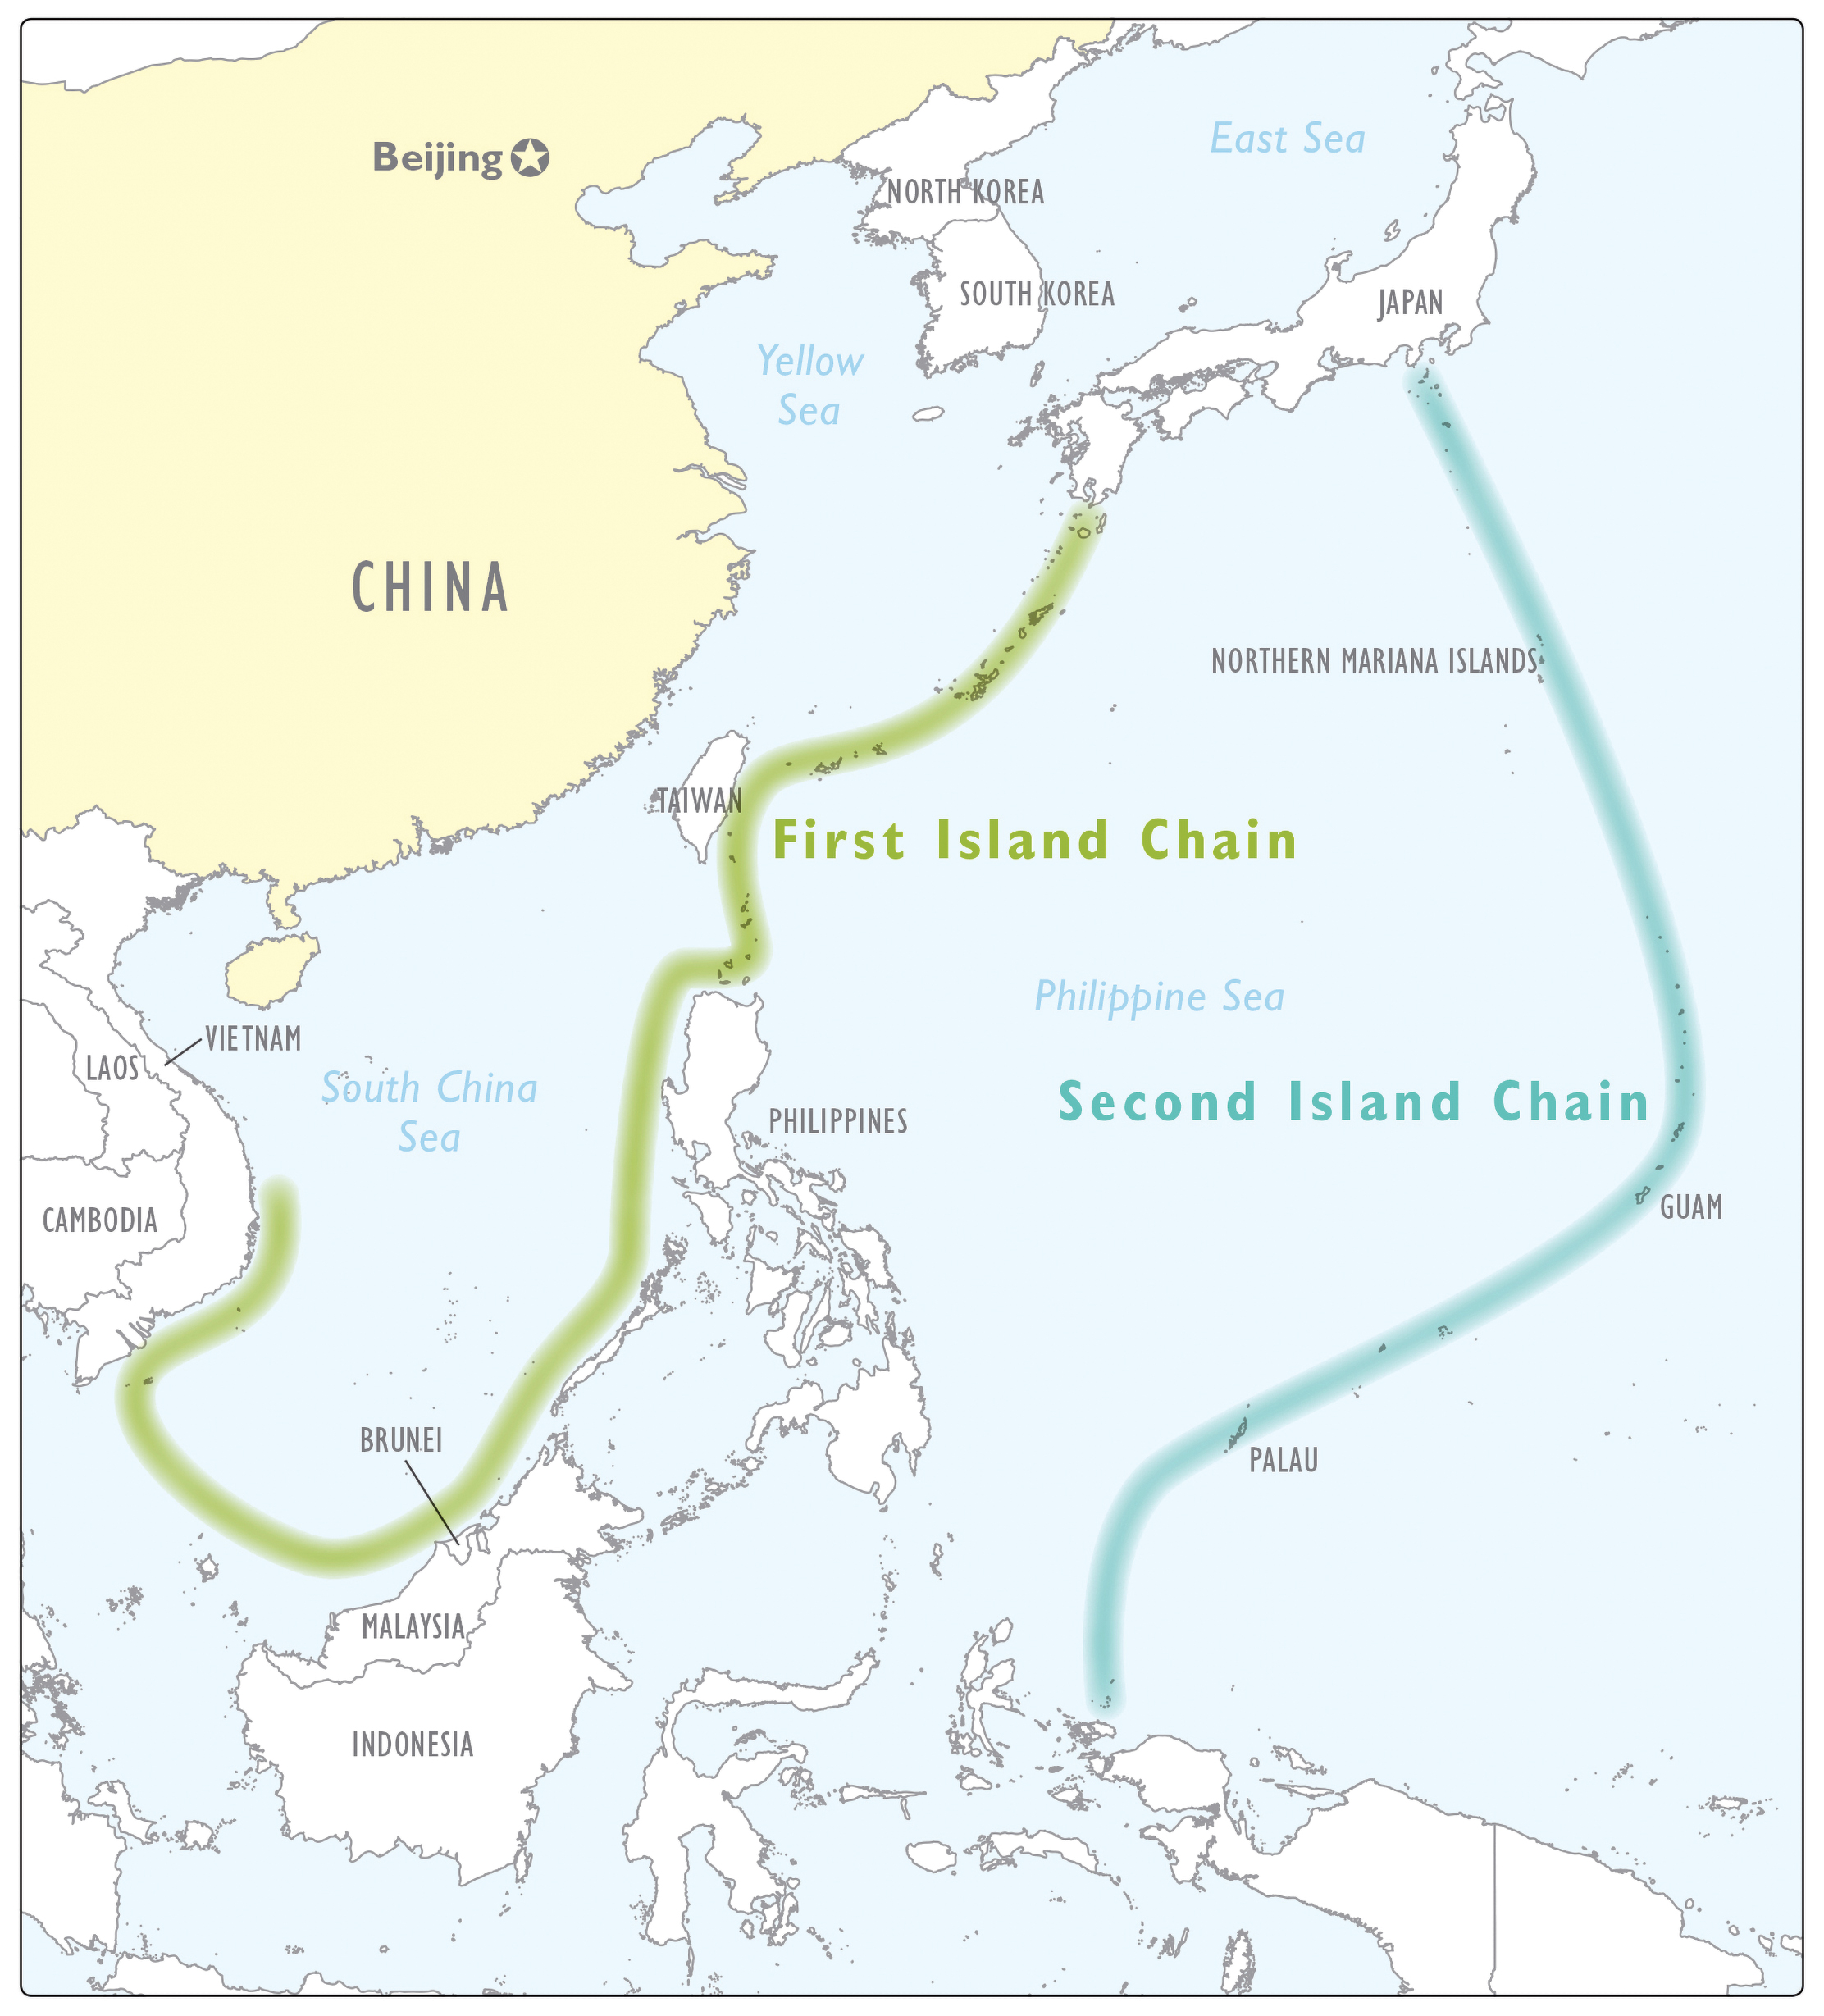 The first island. First and second Island Chains. Island Chain Strategy. Japan and Taiwan Island Chain. Geographic Boundaries of the first and second Island Chains.